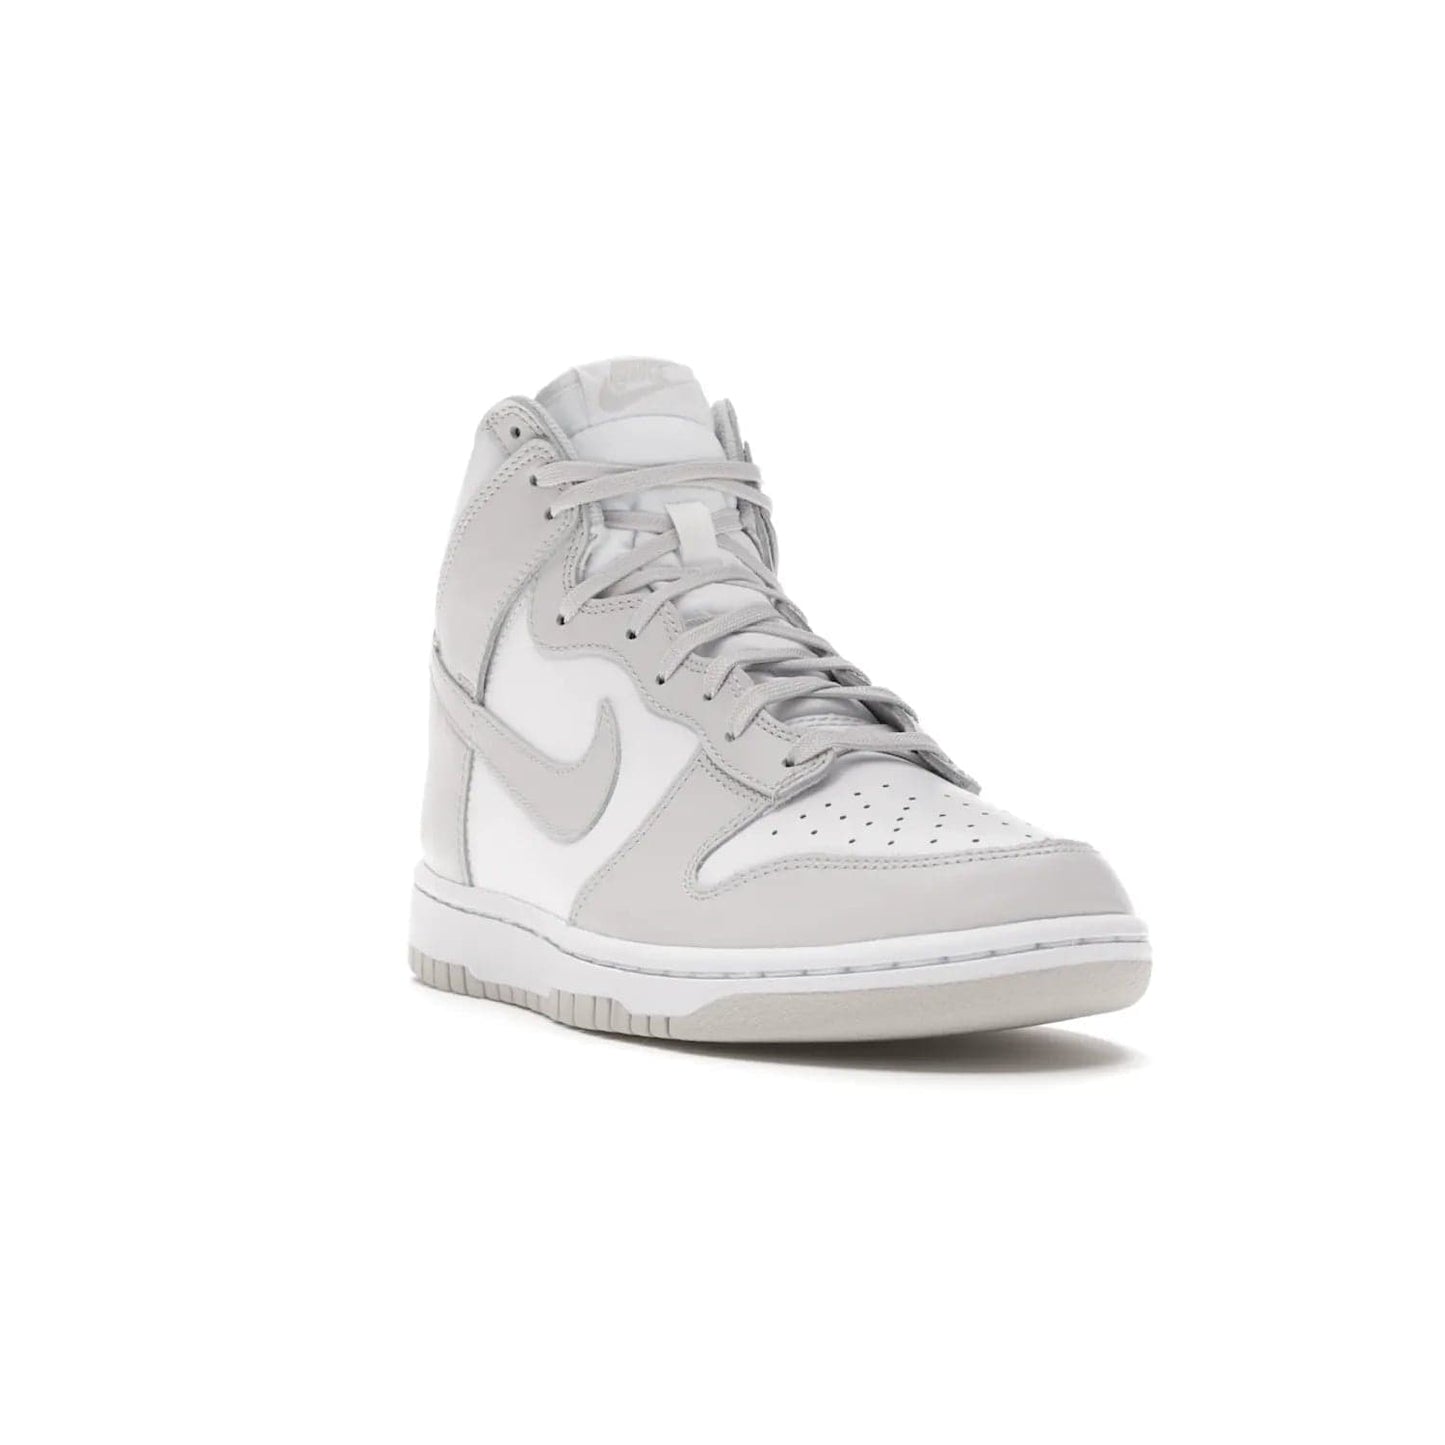 Nike Dunk High Retro White Vast Grey (2021) - Image 7 - Only at www.BallersClubKickz.com - Nike Dunk High Retro White Vast Grey 2021: classic '80s basketball sneaker with a crisp white base, grey overlays, midsole tooling and outsole. Dropped Feb. 2021.